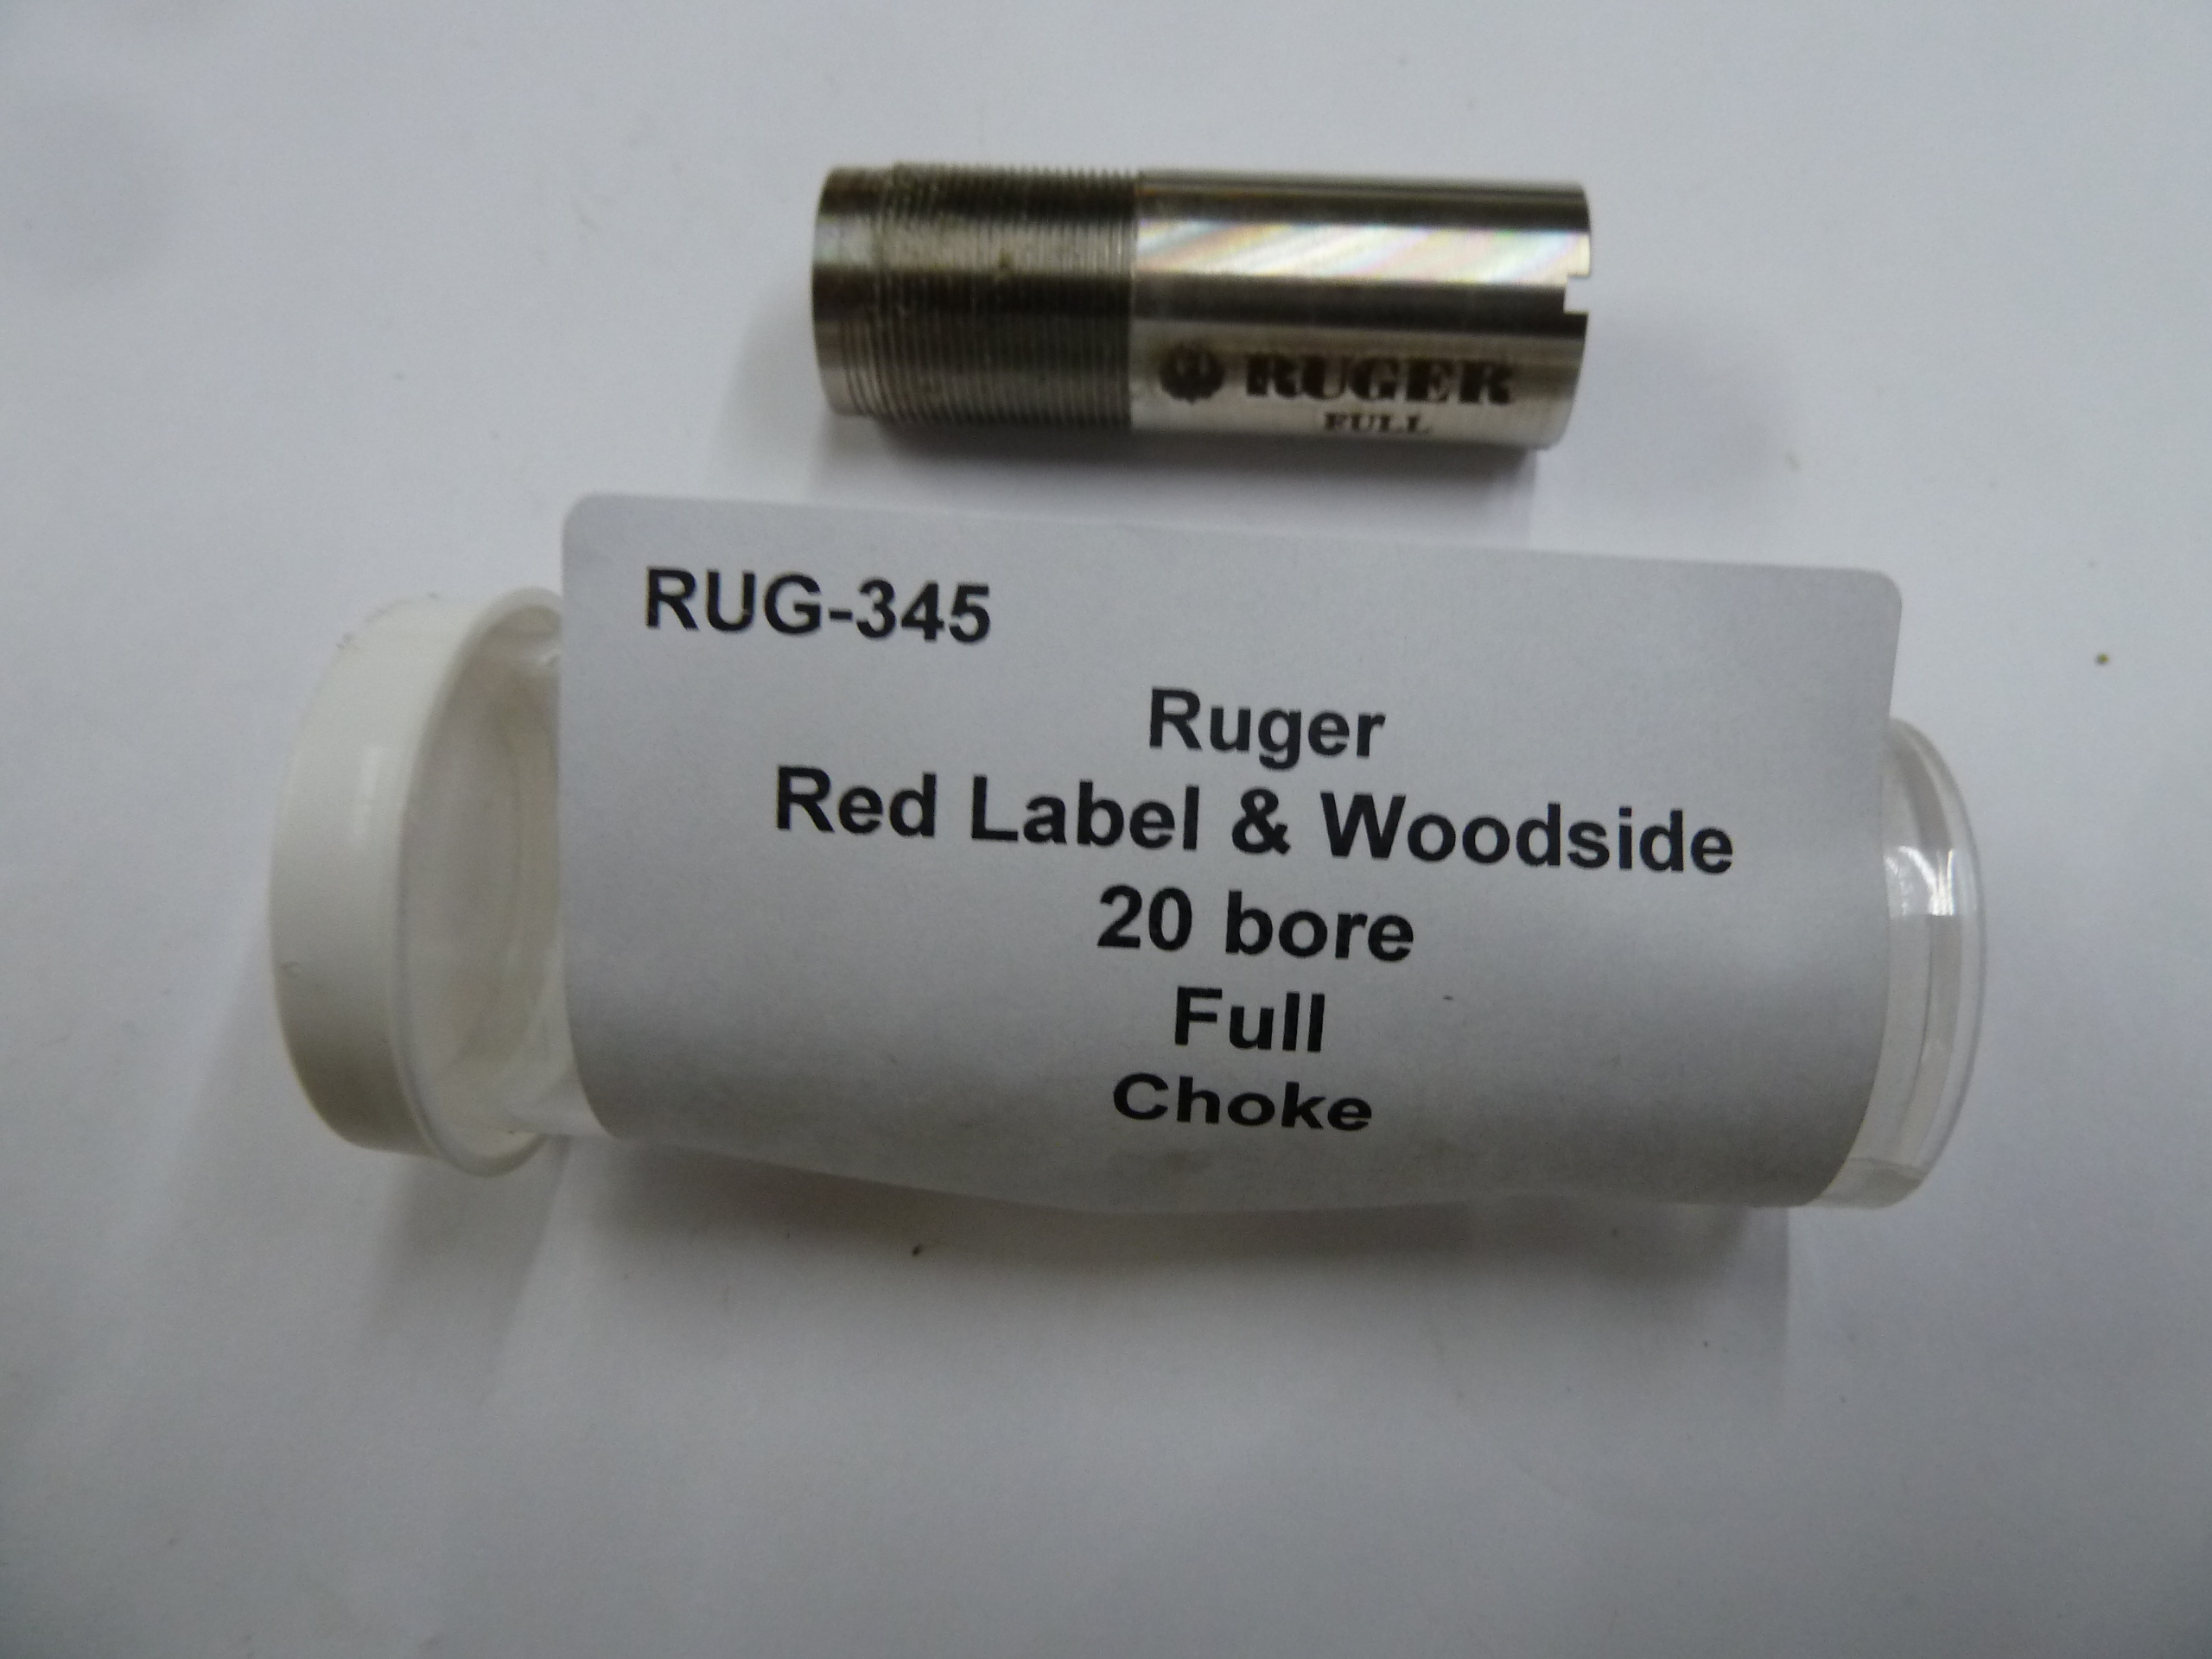 RUG-345 Ruger red label and woodside 20 bore full choke (1)